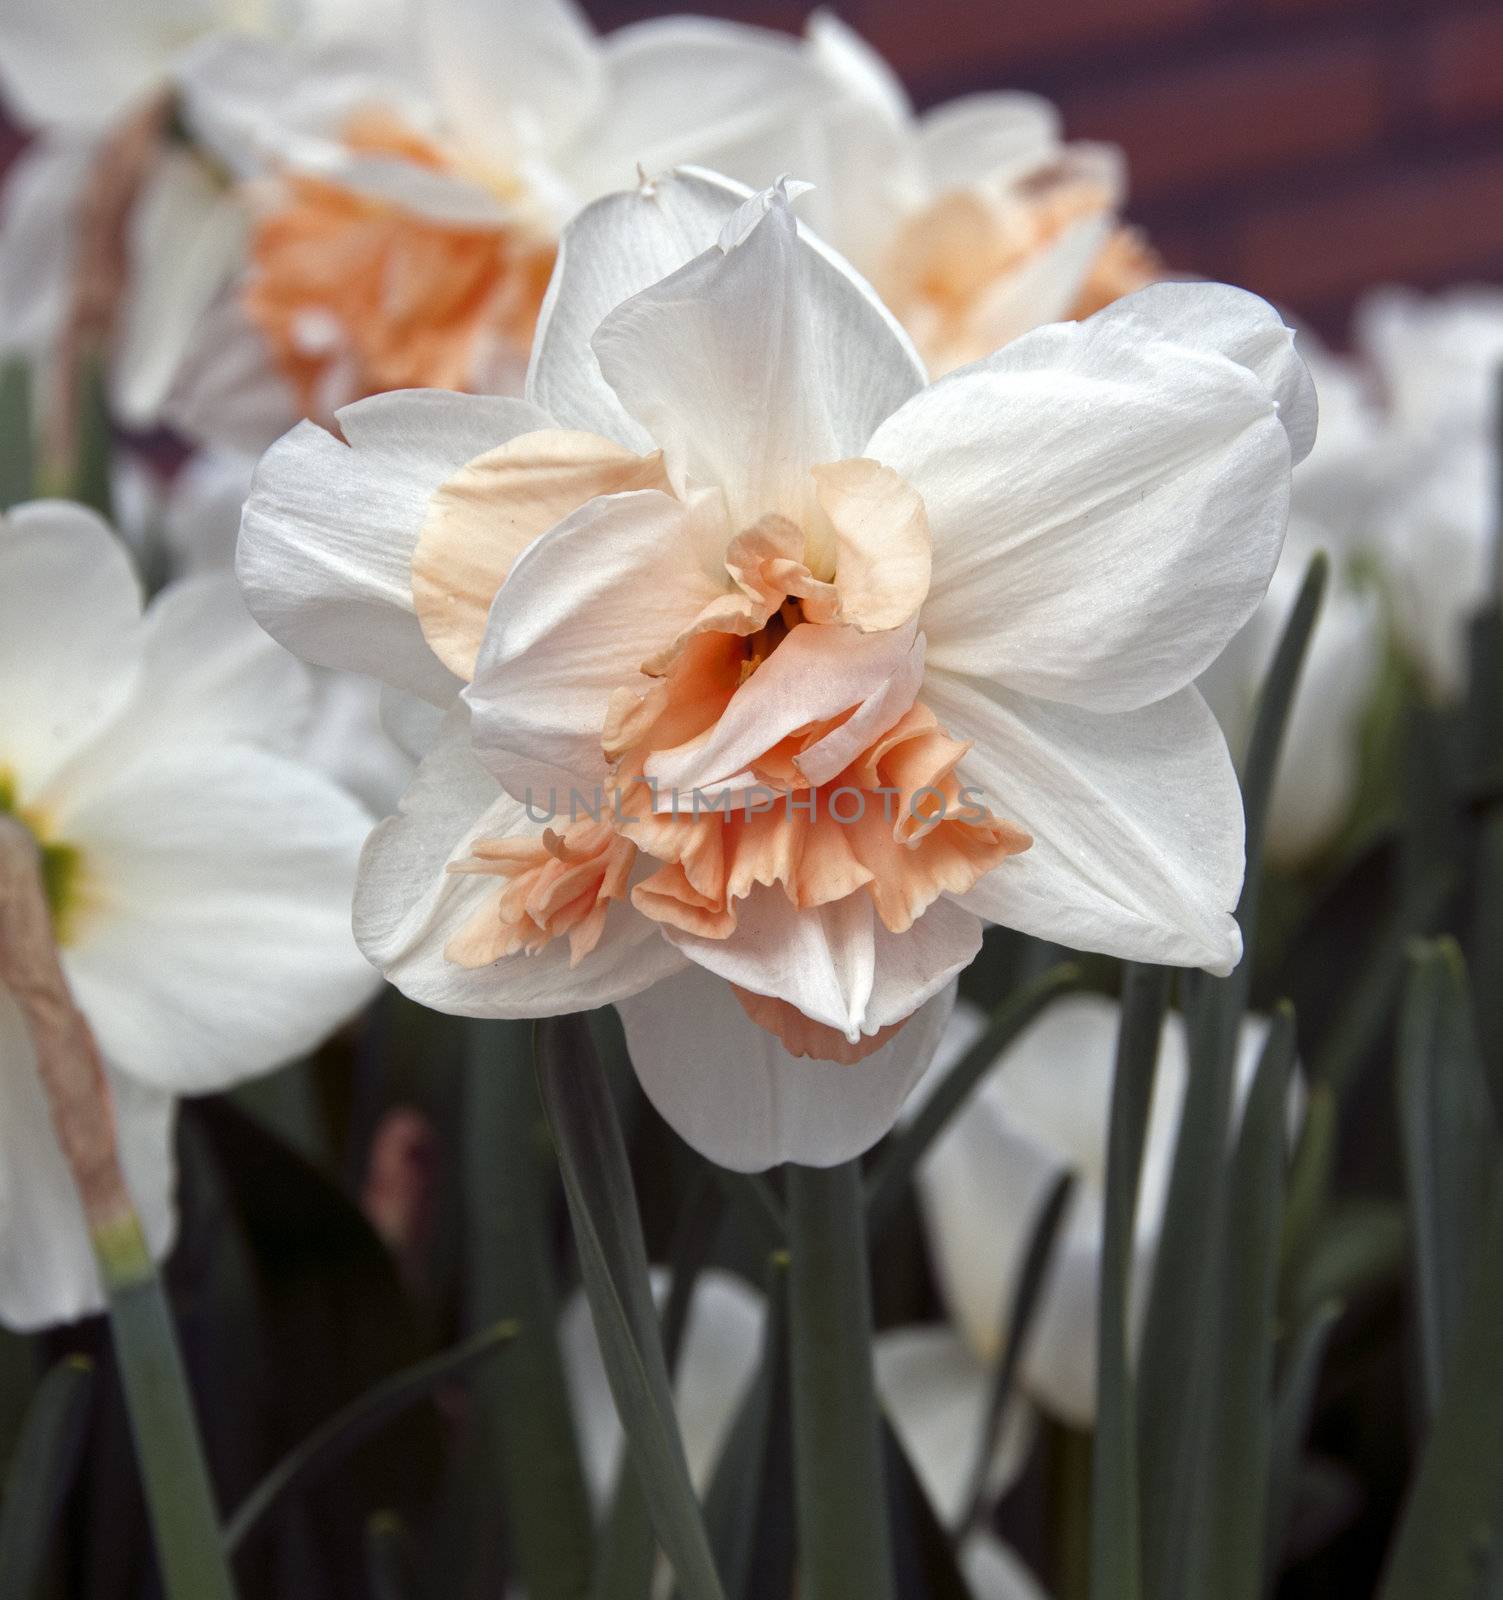 double narcissus by compuinfoto